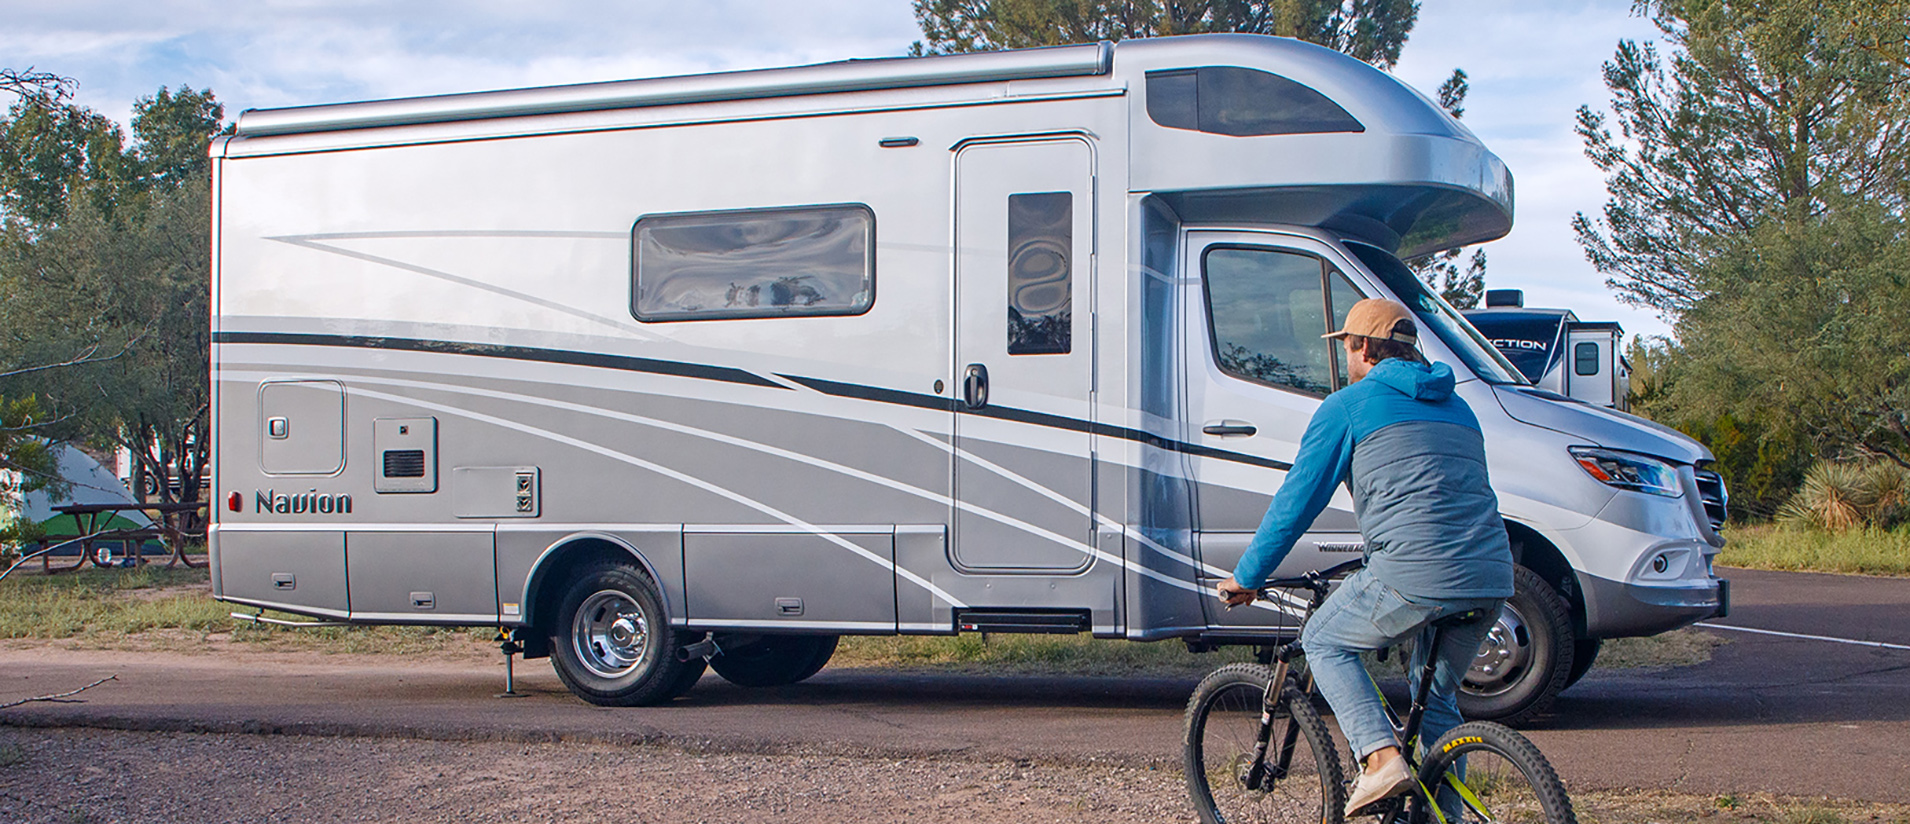 A man rides a bicycle past a gray RV camper at Dead Horse Ranch State Park